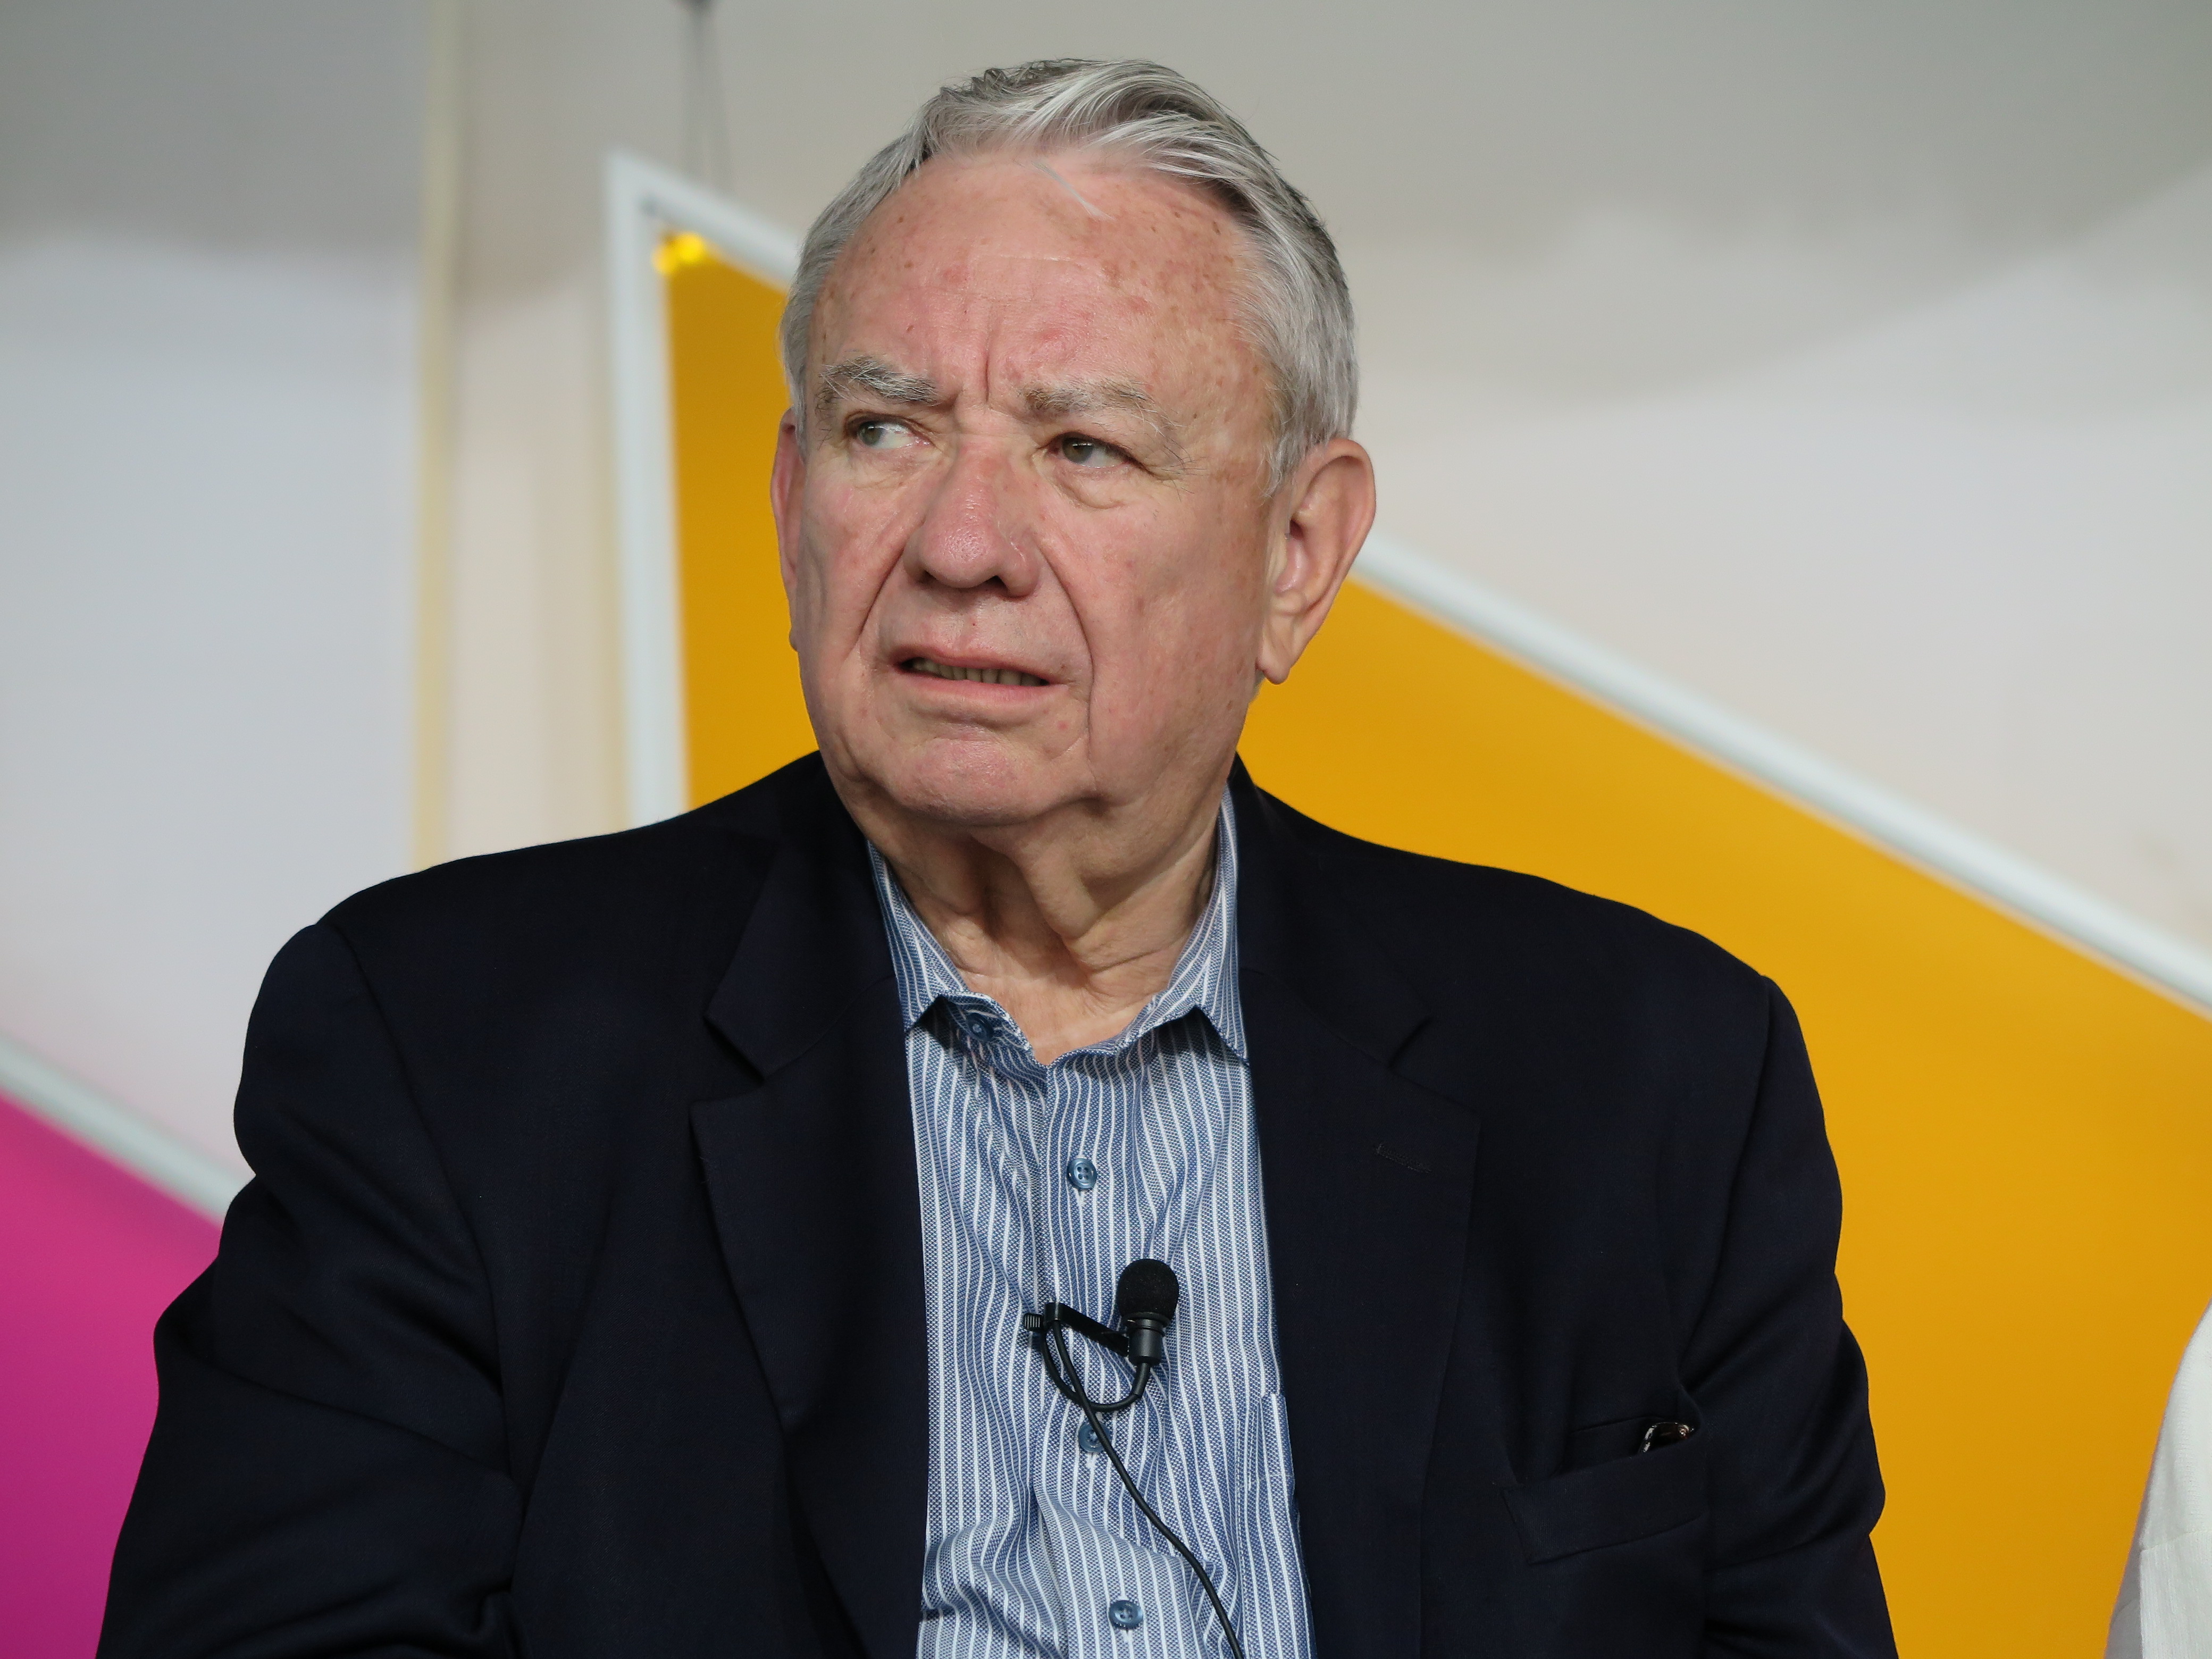 Tommy Thompson at Spotlight Health Aspen Ideas Festival 2015. Photo by Bluerasberry / CC BY-SA (https://creativecommons.org/licenses/by-sa/4.0).